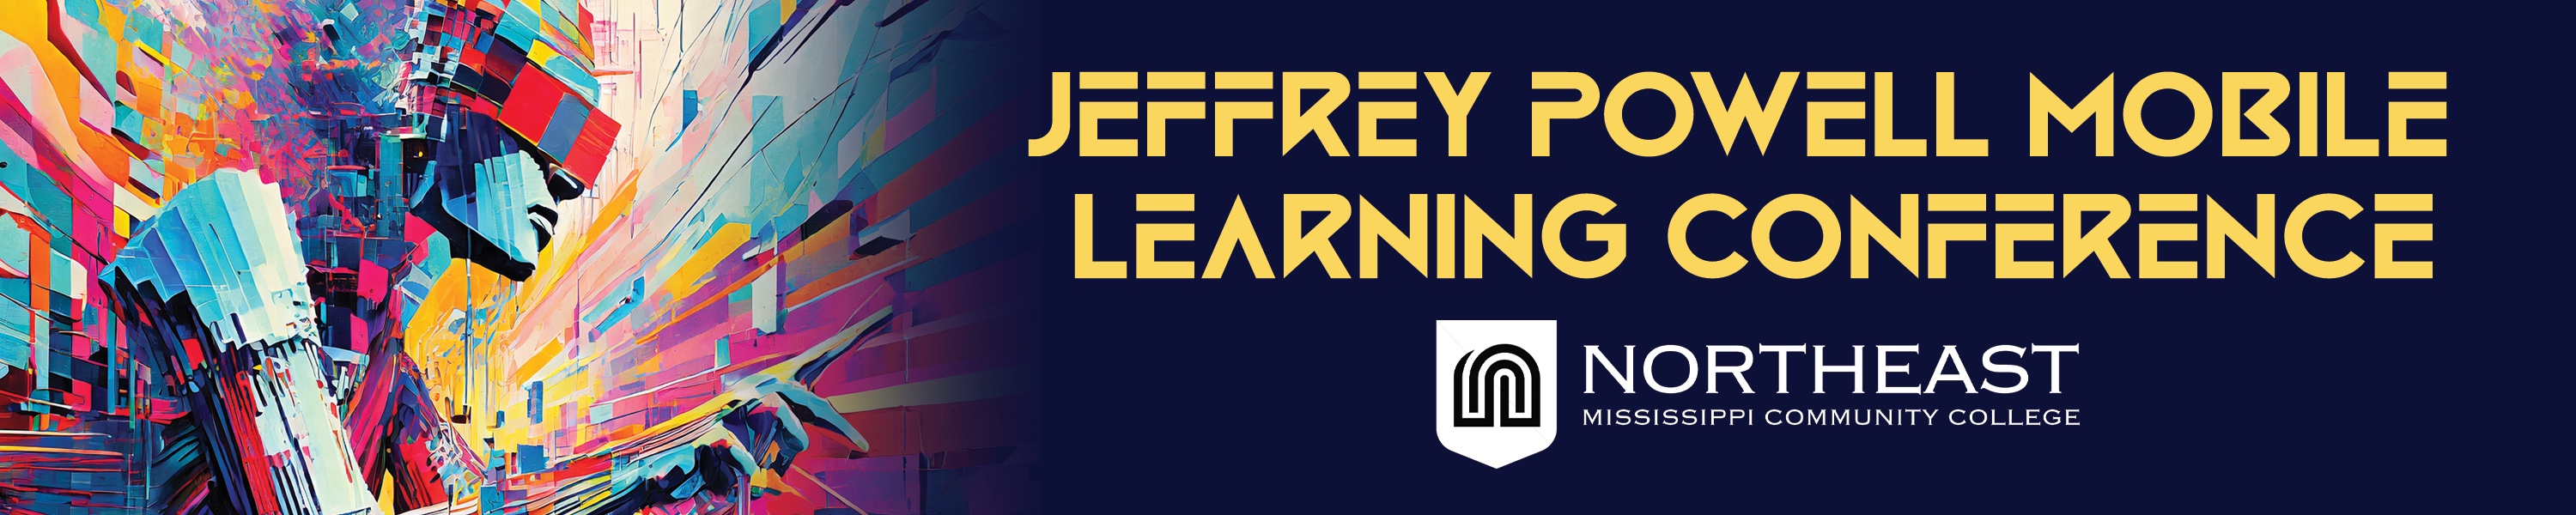 Jeffery Powell Mobile Learning Conference Welcome Banner